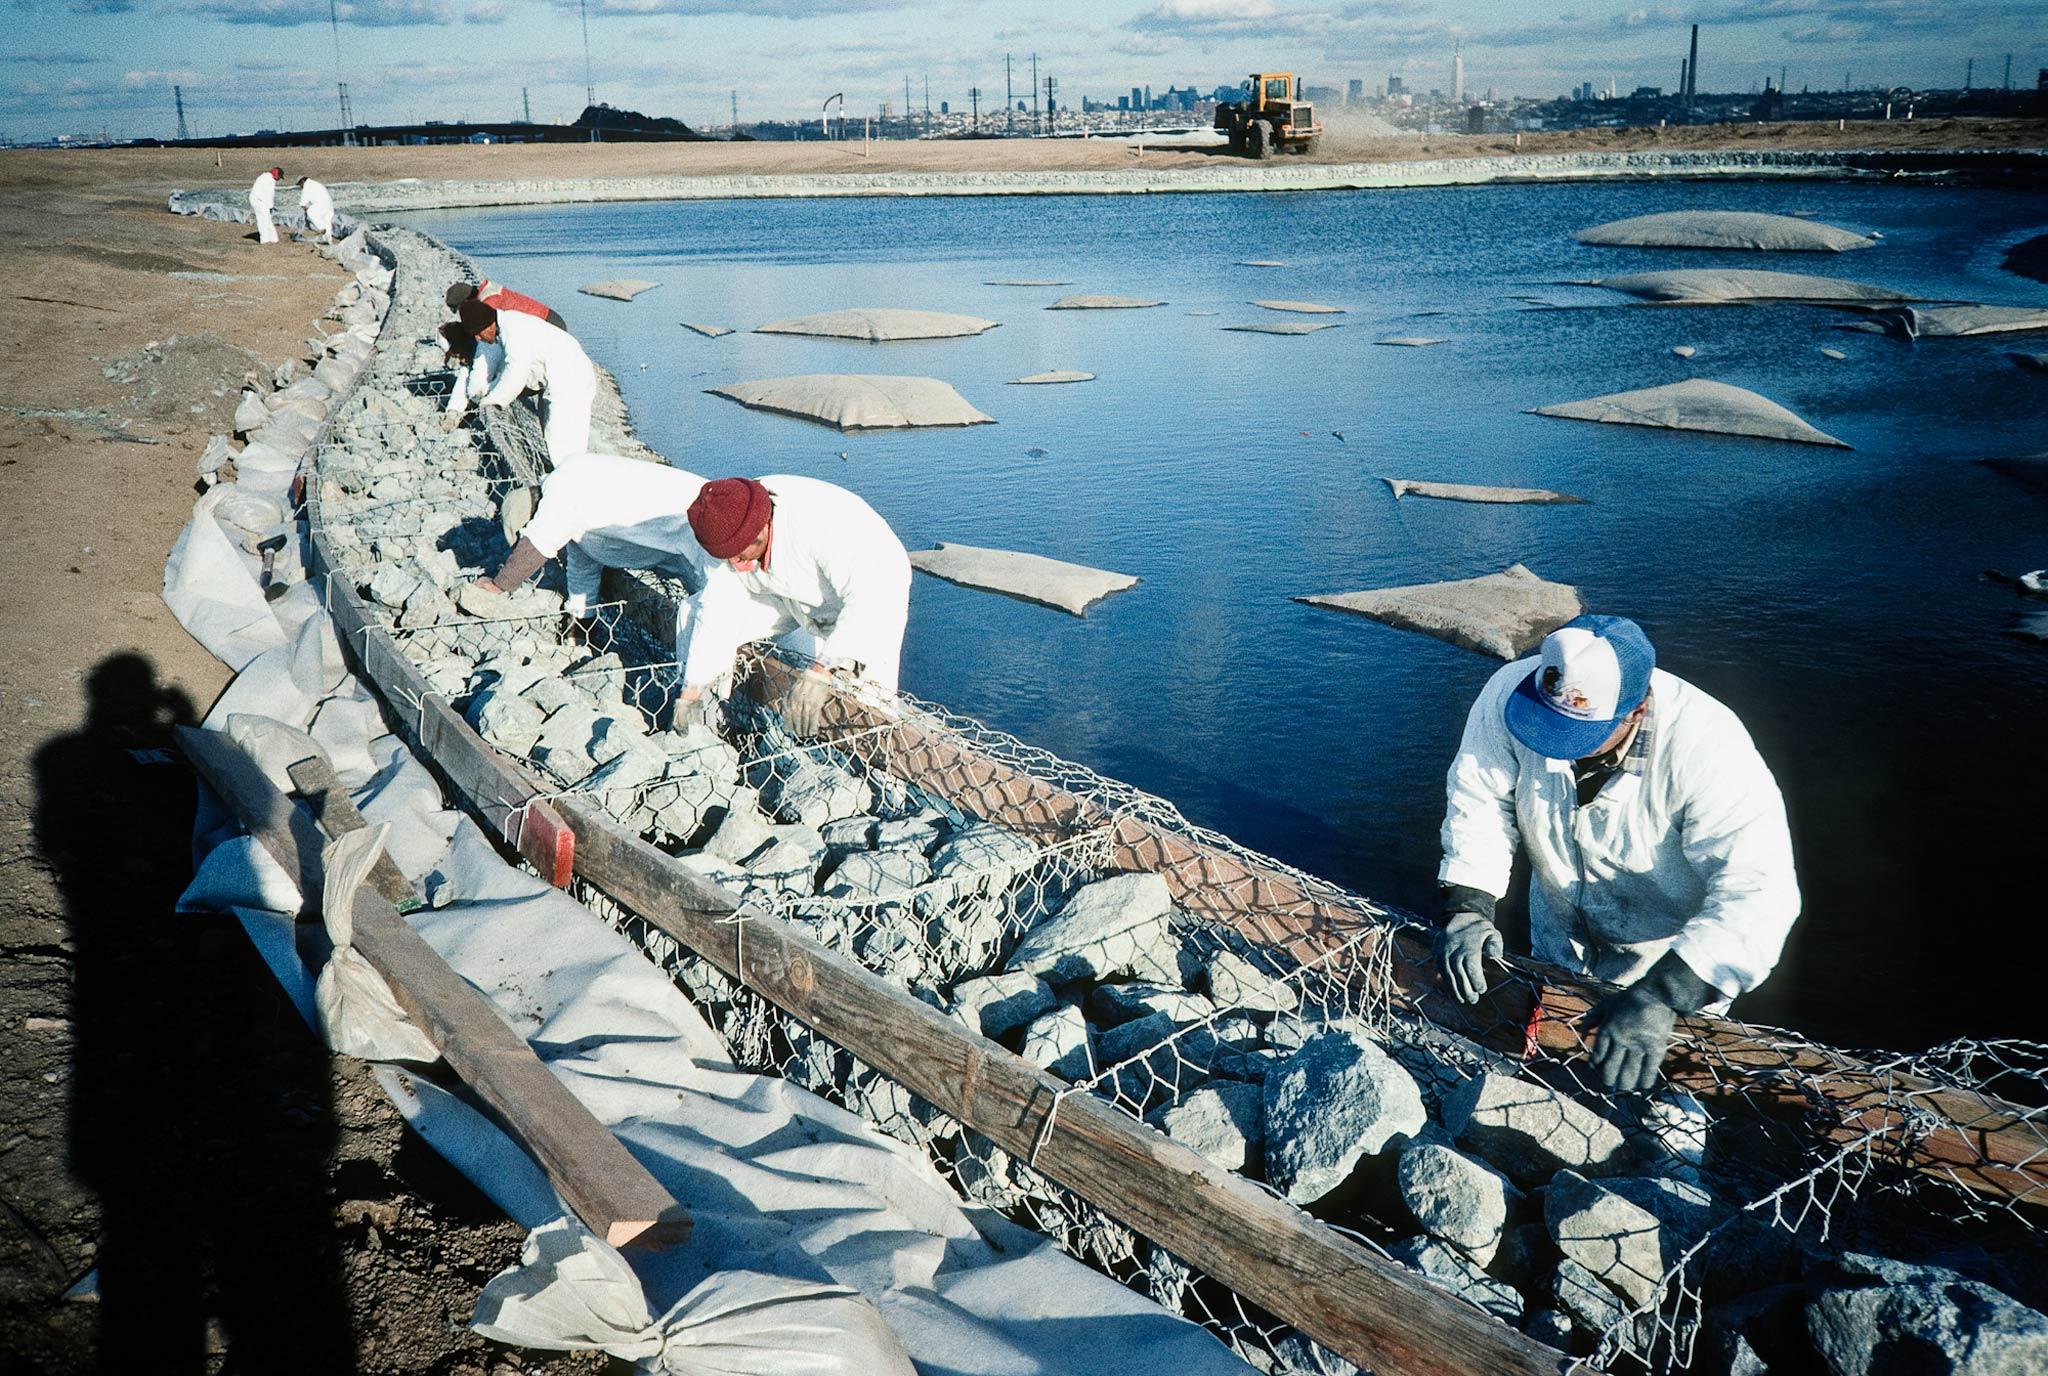 Workers filling gabions with rocks to create a retaining wall along the edge of a pond